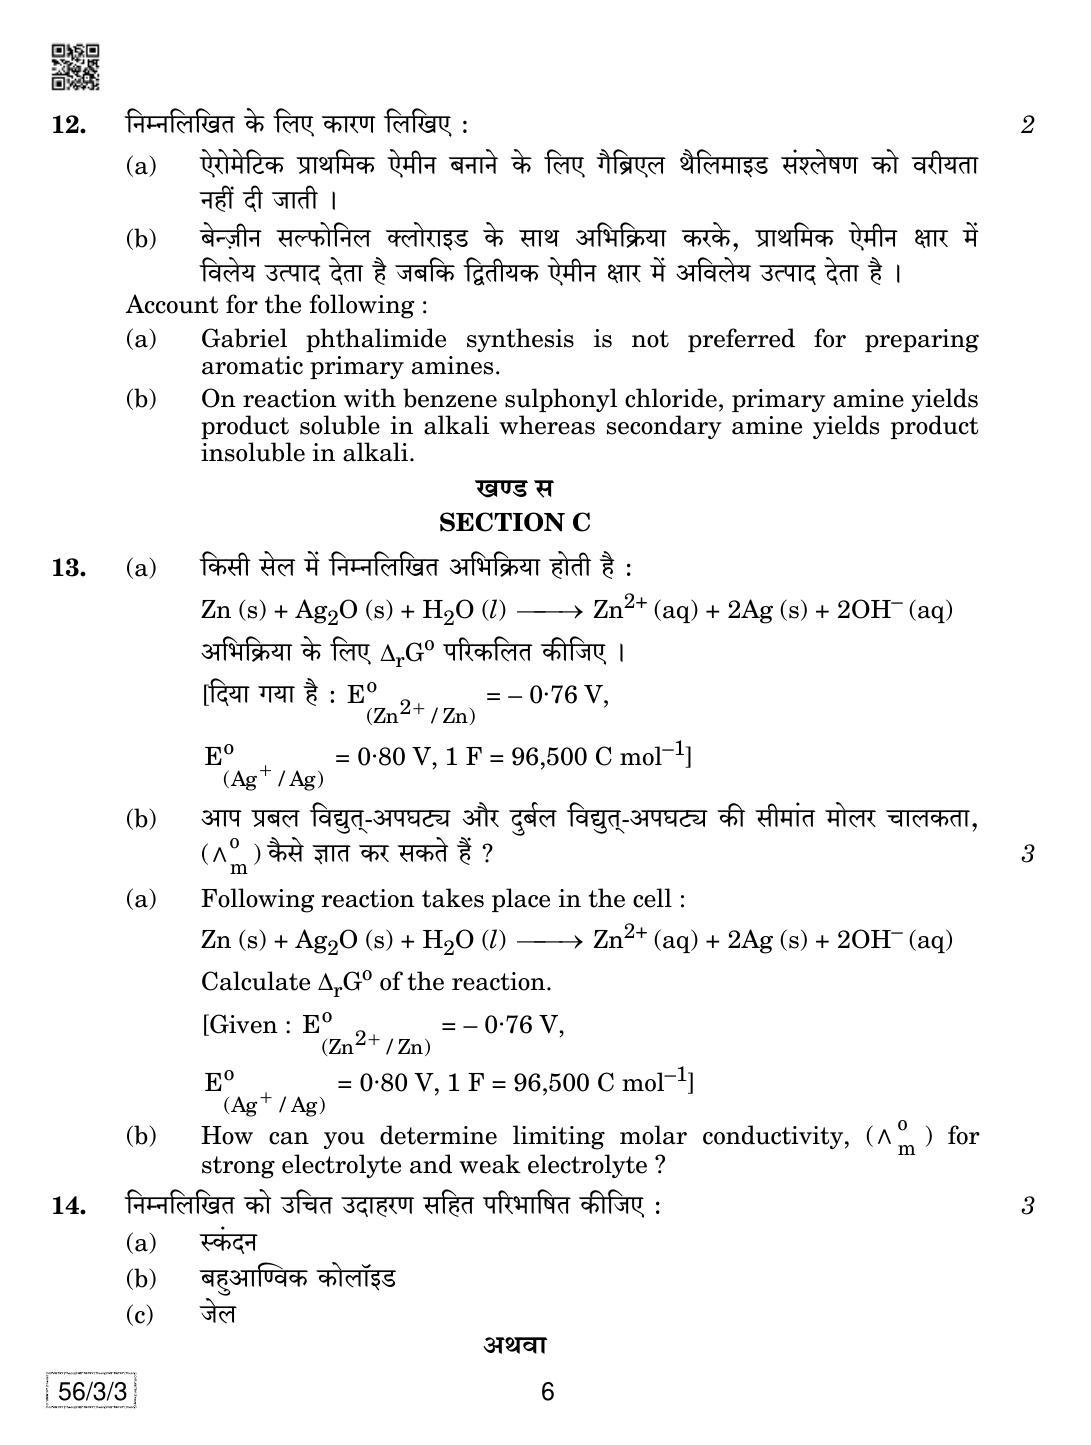 CBSE Class 12 56-3-3 Chemistry 2019 Question Paper - Page 6